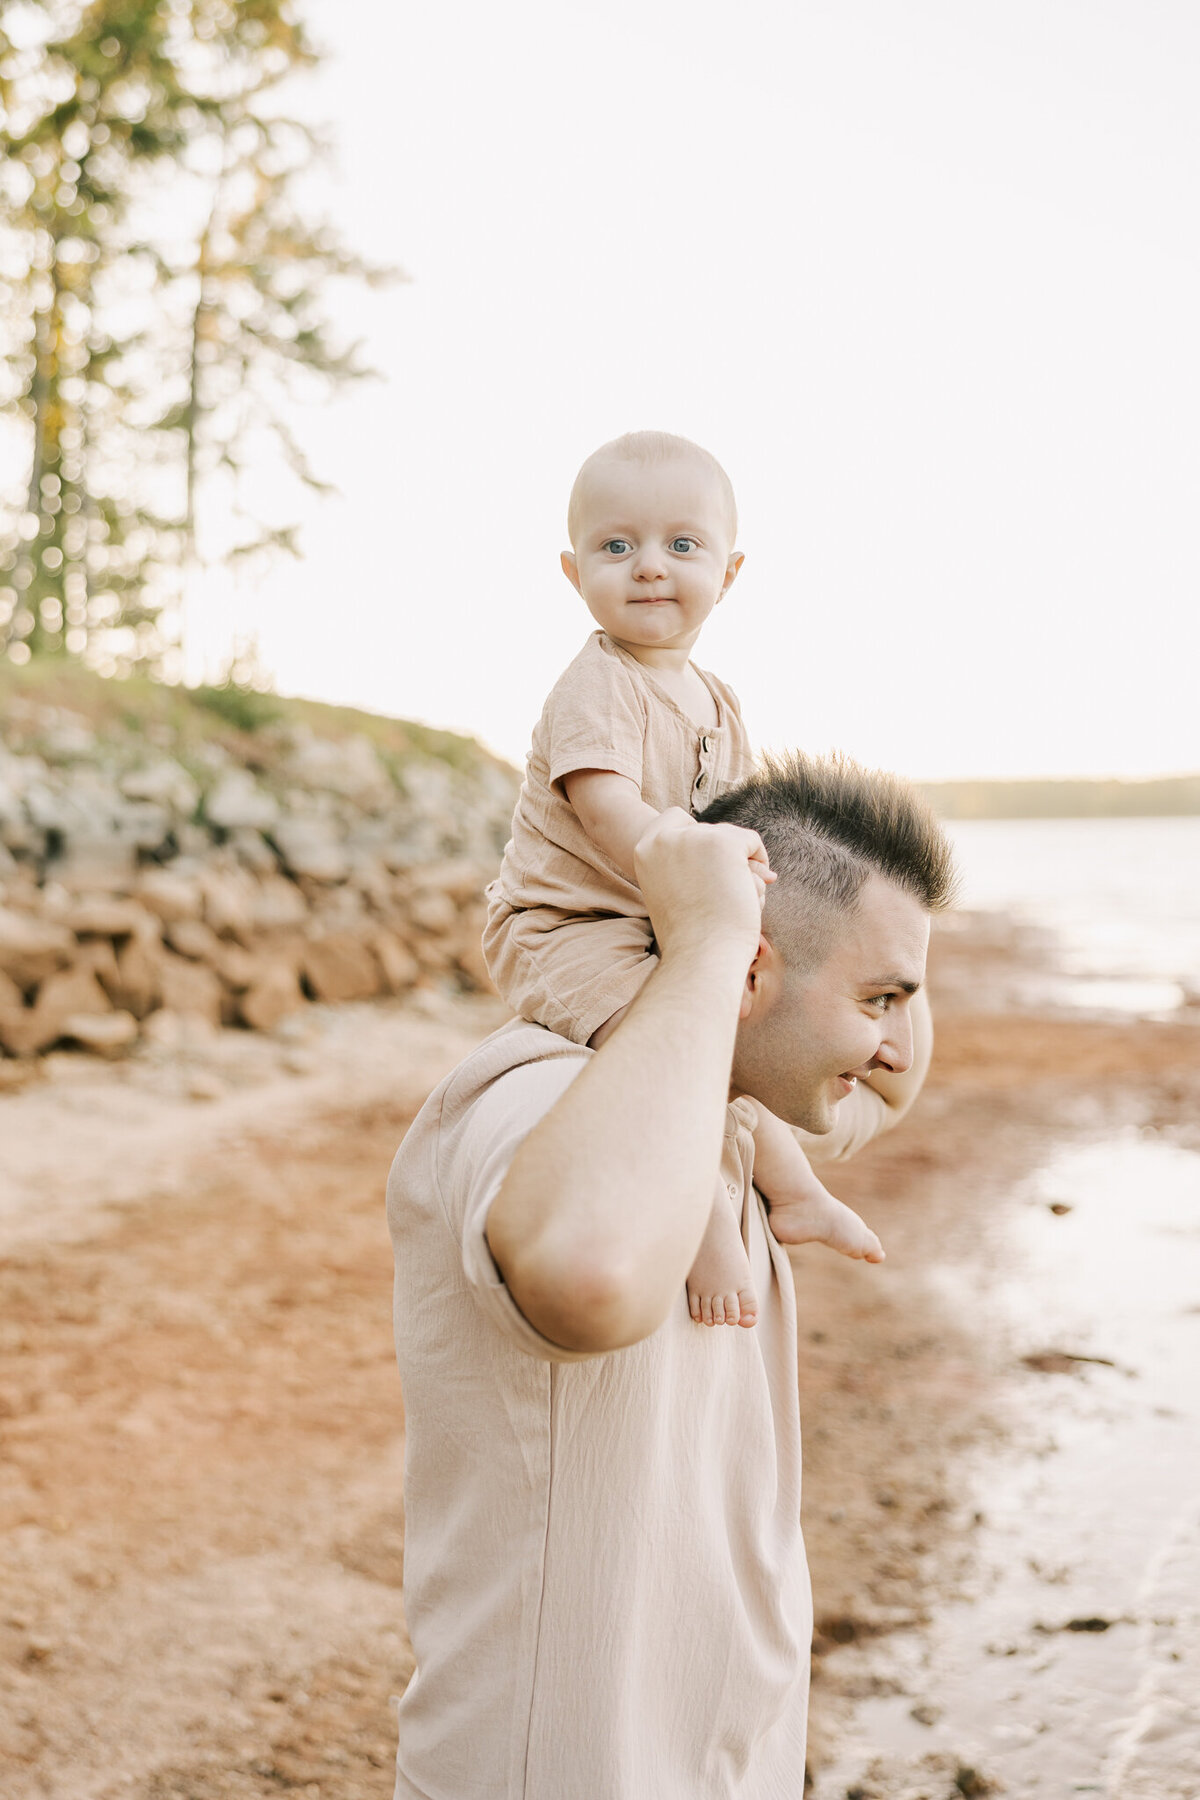 Baby boy riding on the shoulders of his dad during their family session